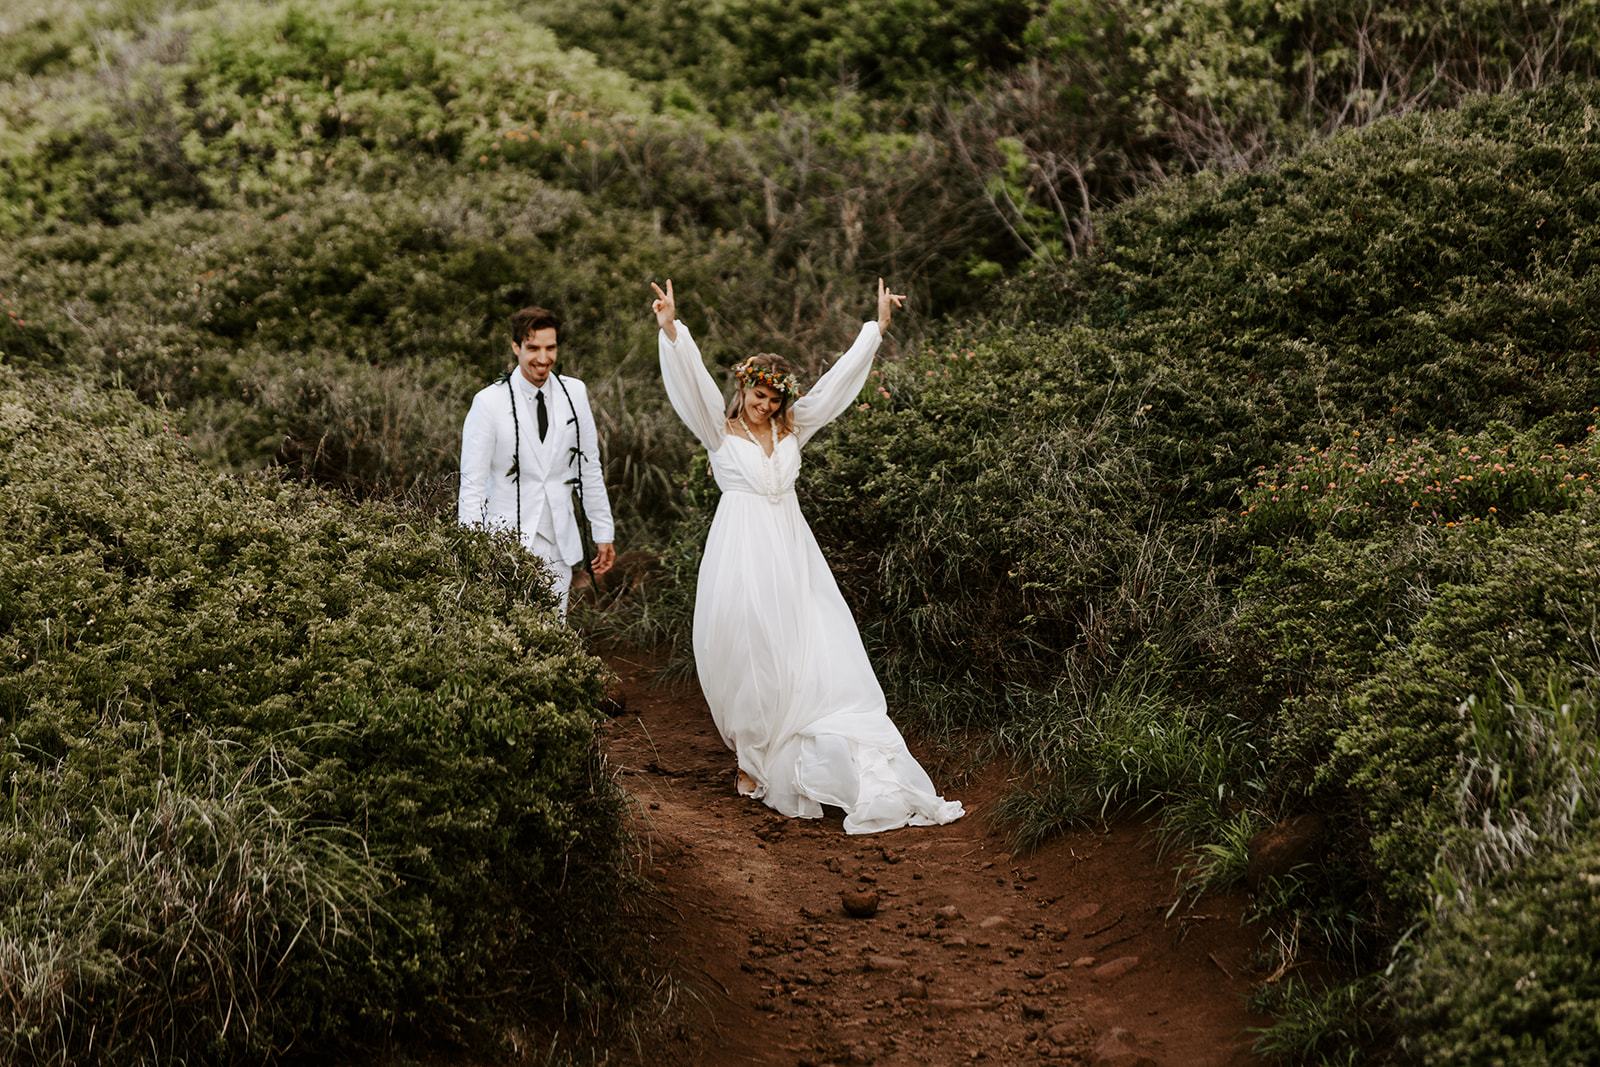 A couple who had a Maui elopement cheers after their Hawaii cliffside wedding ceremony